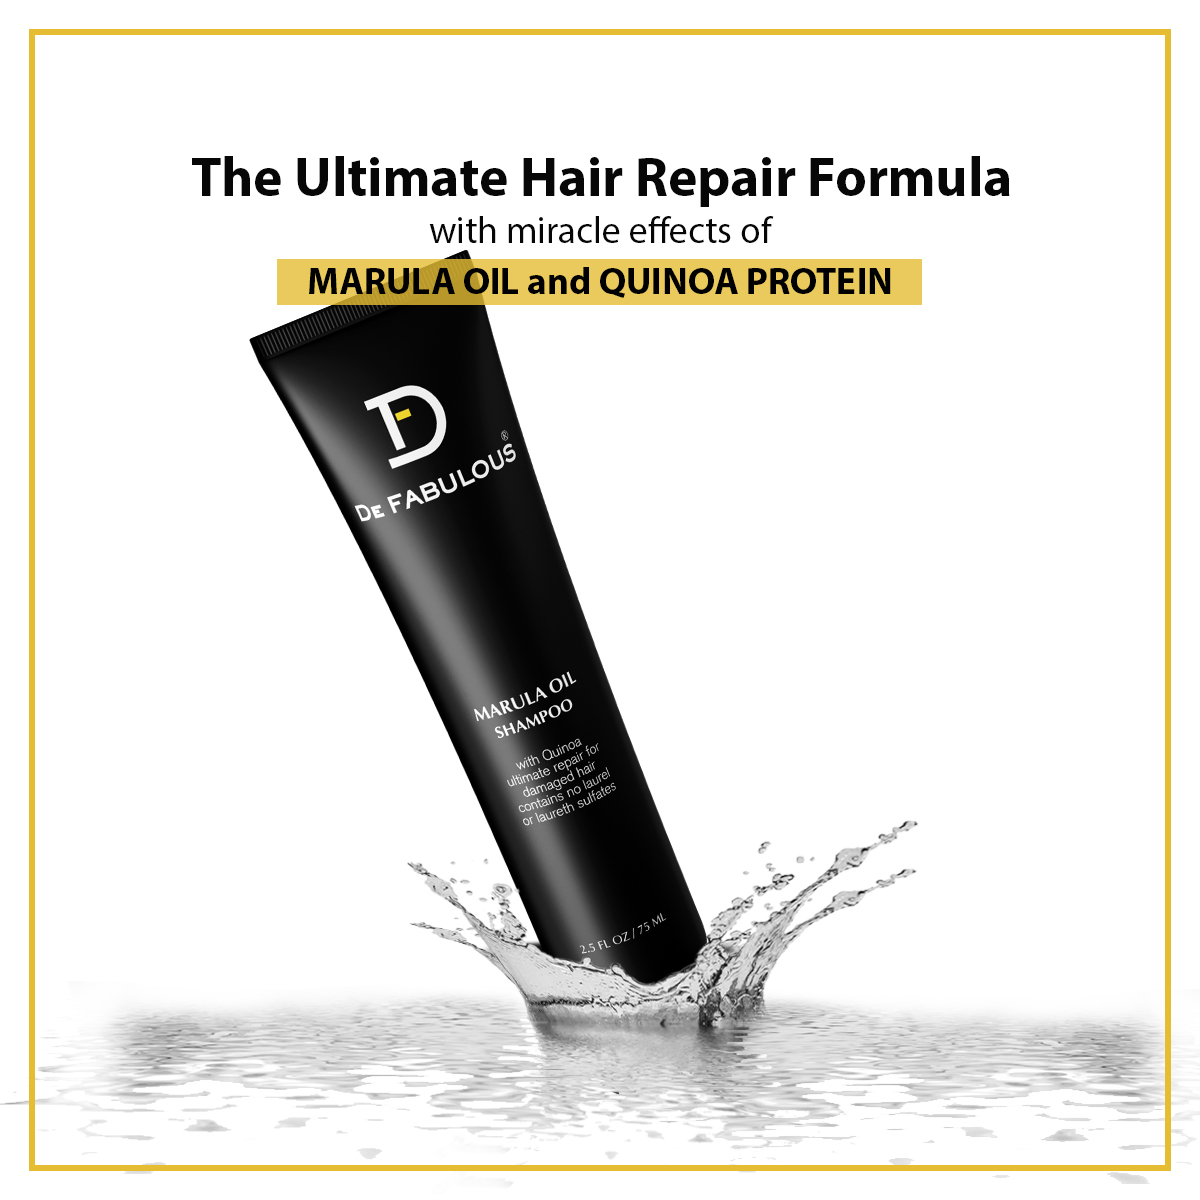 The ultimate hair repair formula with miracle effects of Marula Oil and Quinoa protein.